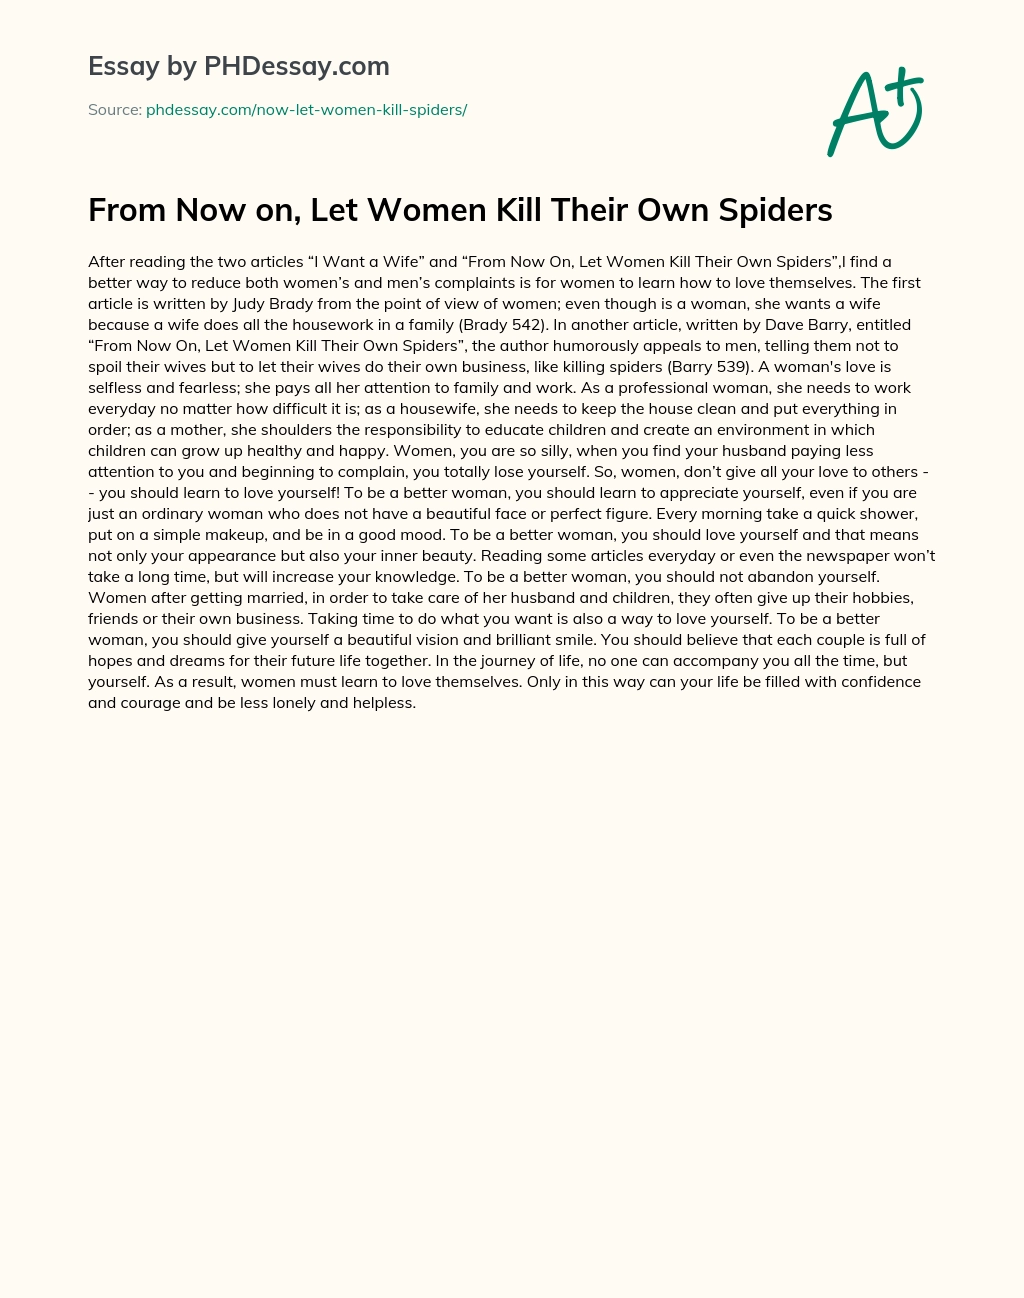 From Now on, Let Women Kill Their Own Spiders essay